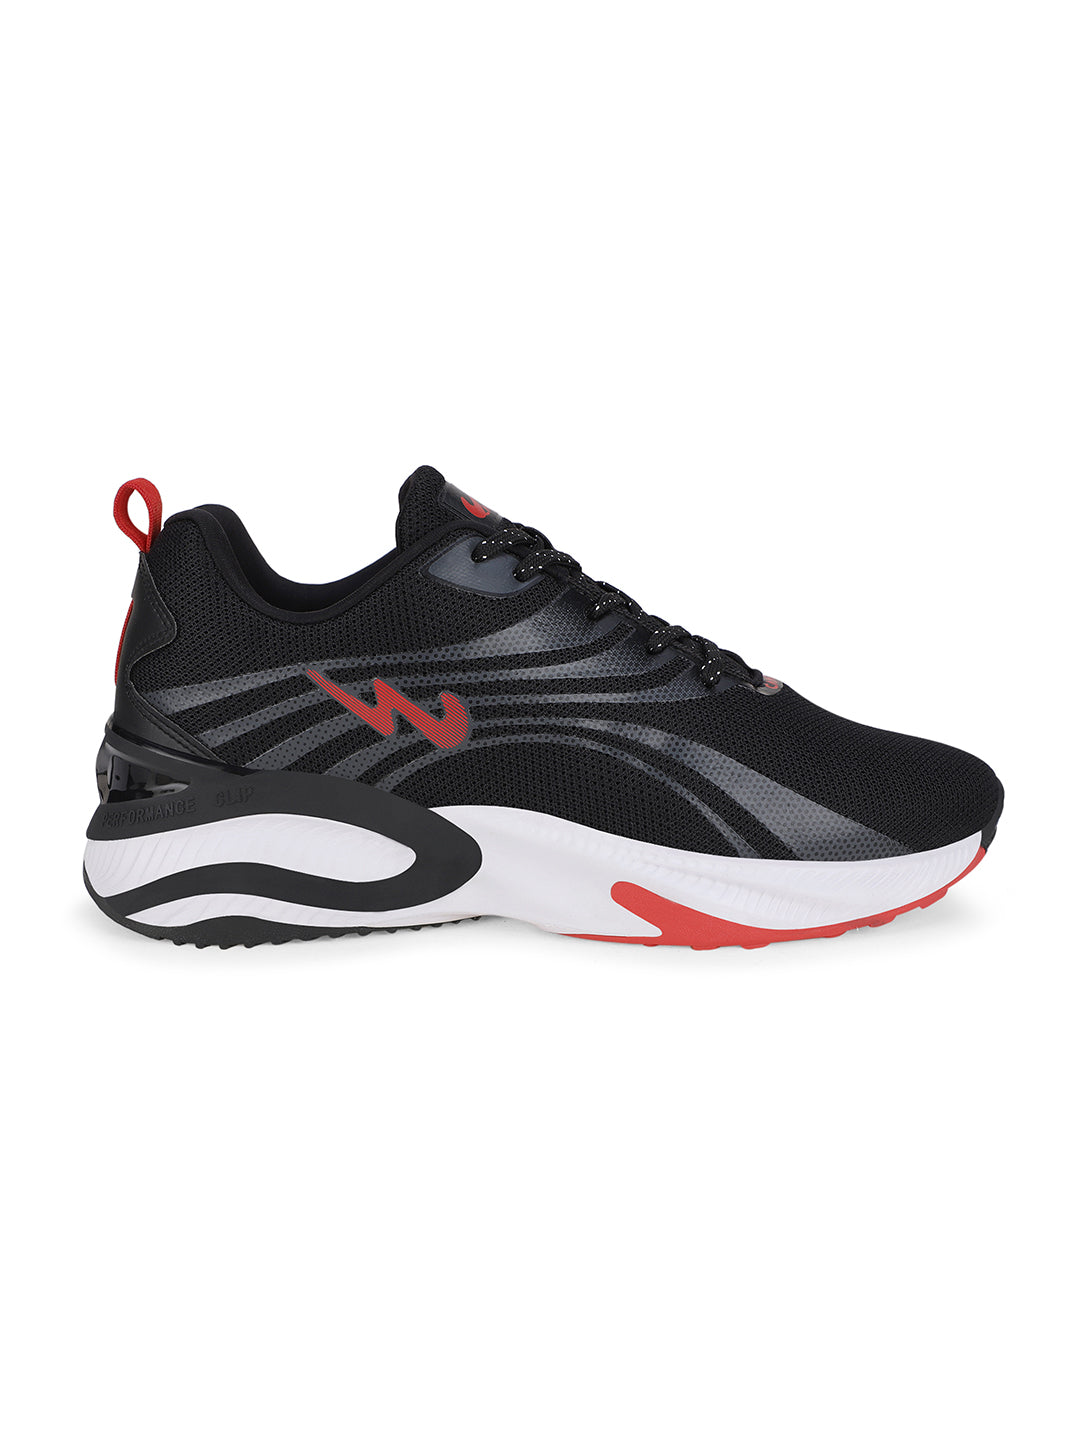 CAMP-GLOVE Black Men's Running Shoes – Campus Shoes